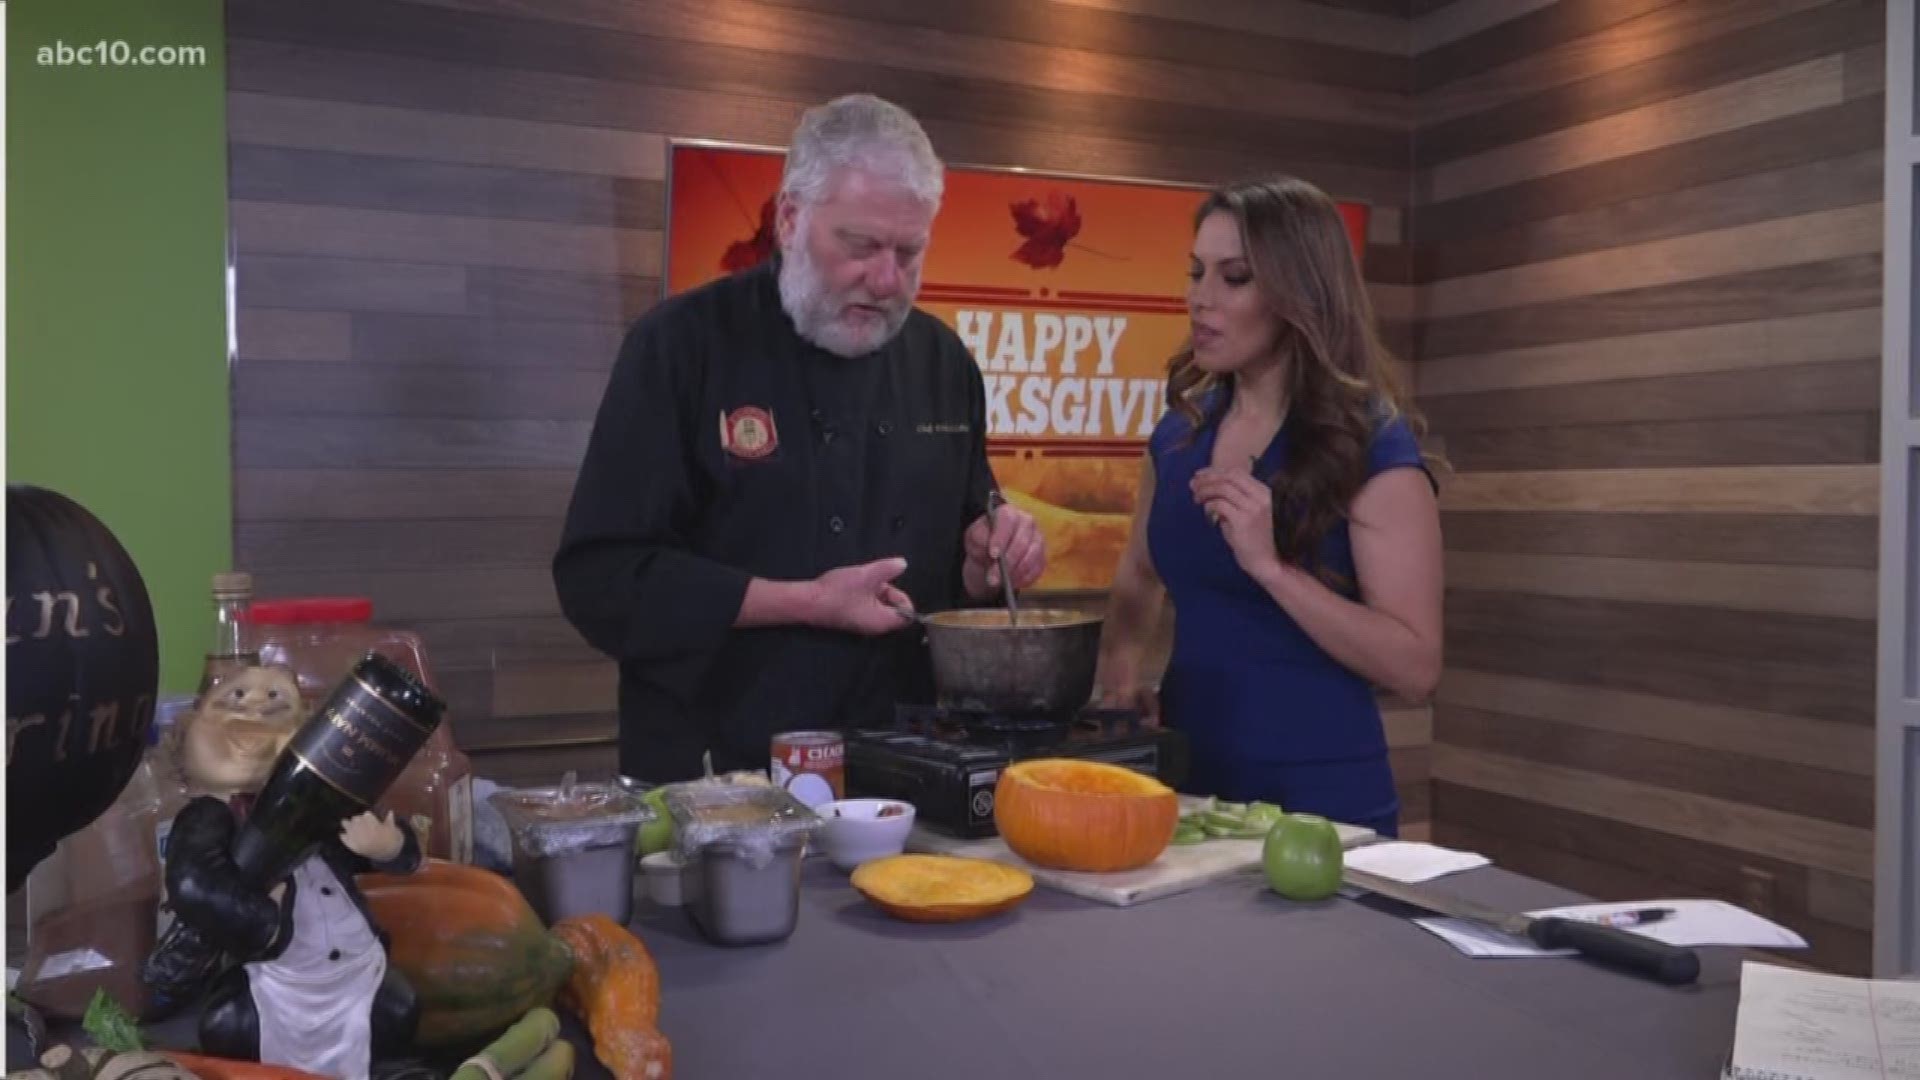 Chef Evan Elsberry, from Evan's Kitchen in Sacramento, shows us how you can impress your guests this Thanksgiving, by whipping up a vegan pumpkin apple soup inside a mini pumpkin.